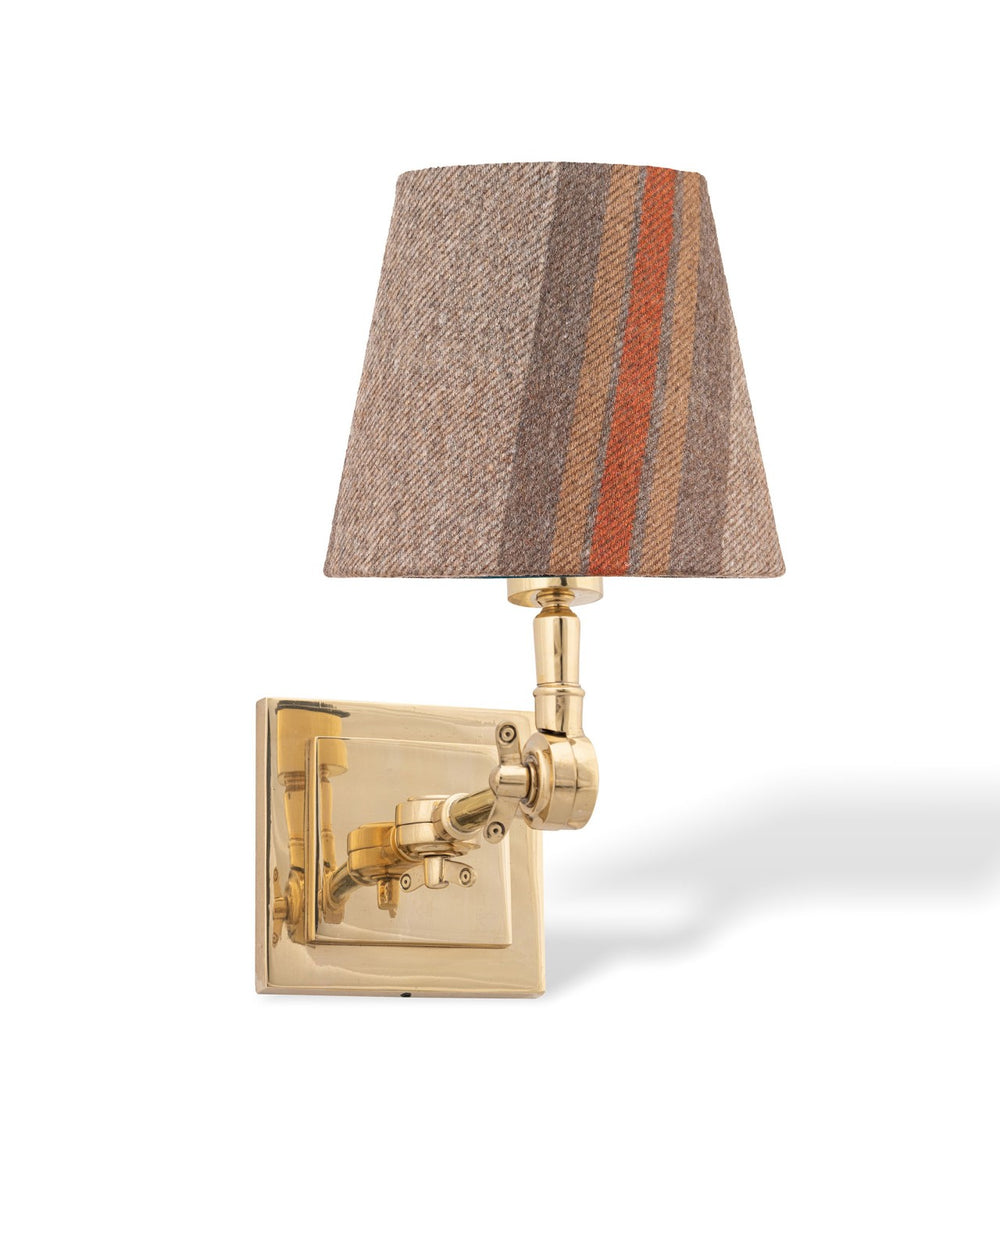 Mind-The-Gap-Tyrol-Collection-Chalet-Wool-Wall-Shade-Brown-stripes-Cabin-Apres-SKi-style-wall-scone-lamp-shade